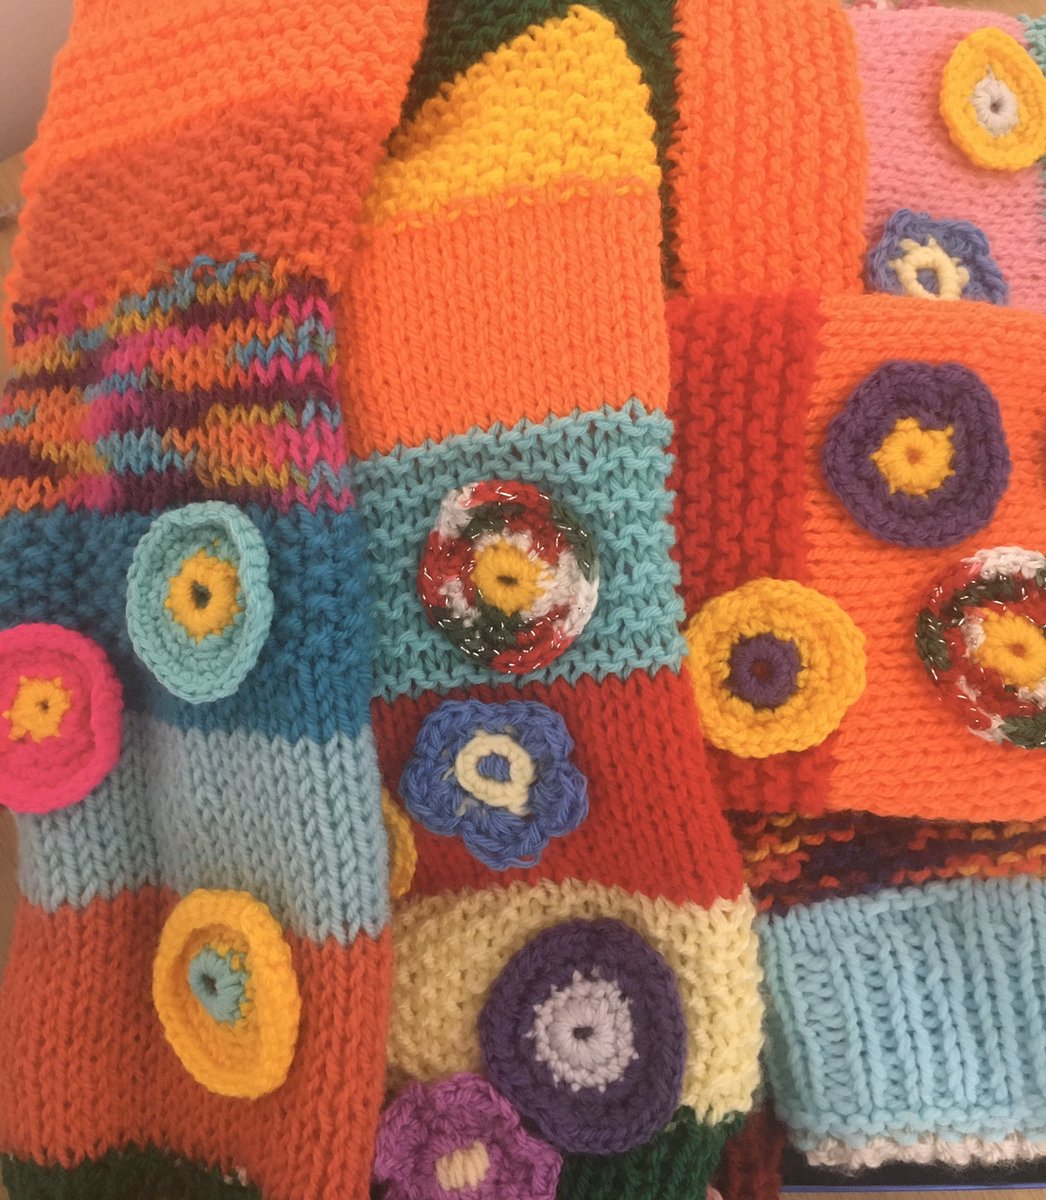 Big thank you to Eileen Cowshall @HfdnwUkOfficial for these beautiful, colourful cannula sleeves from the Dementia Team @UHSFT